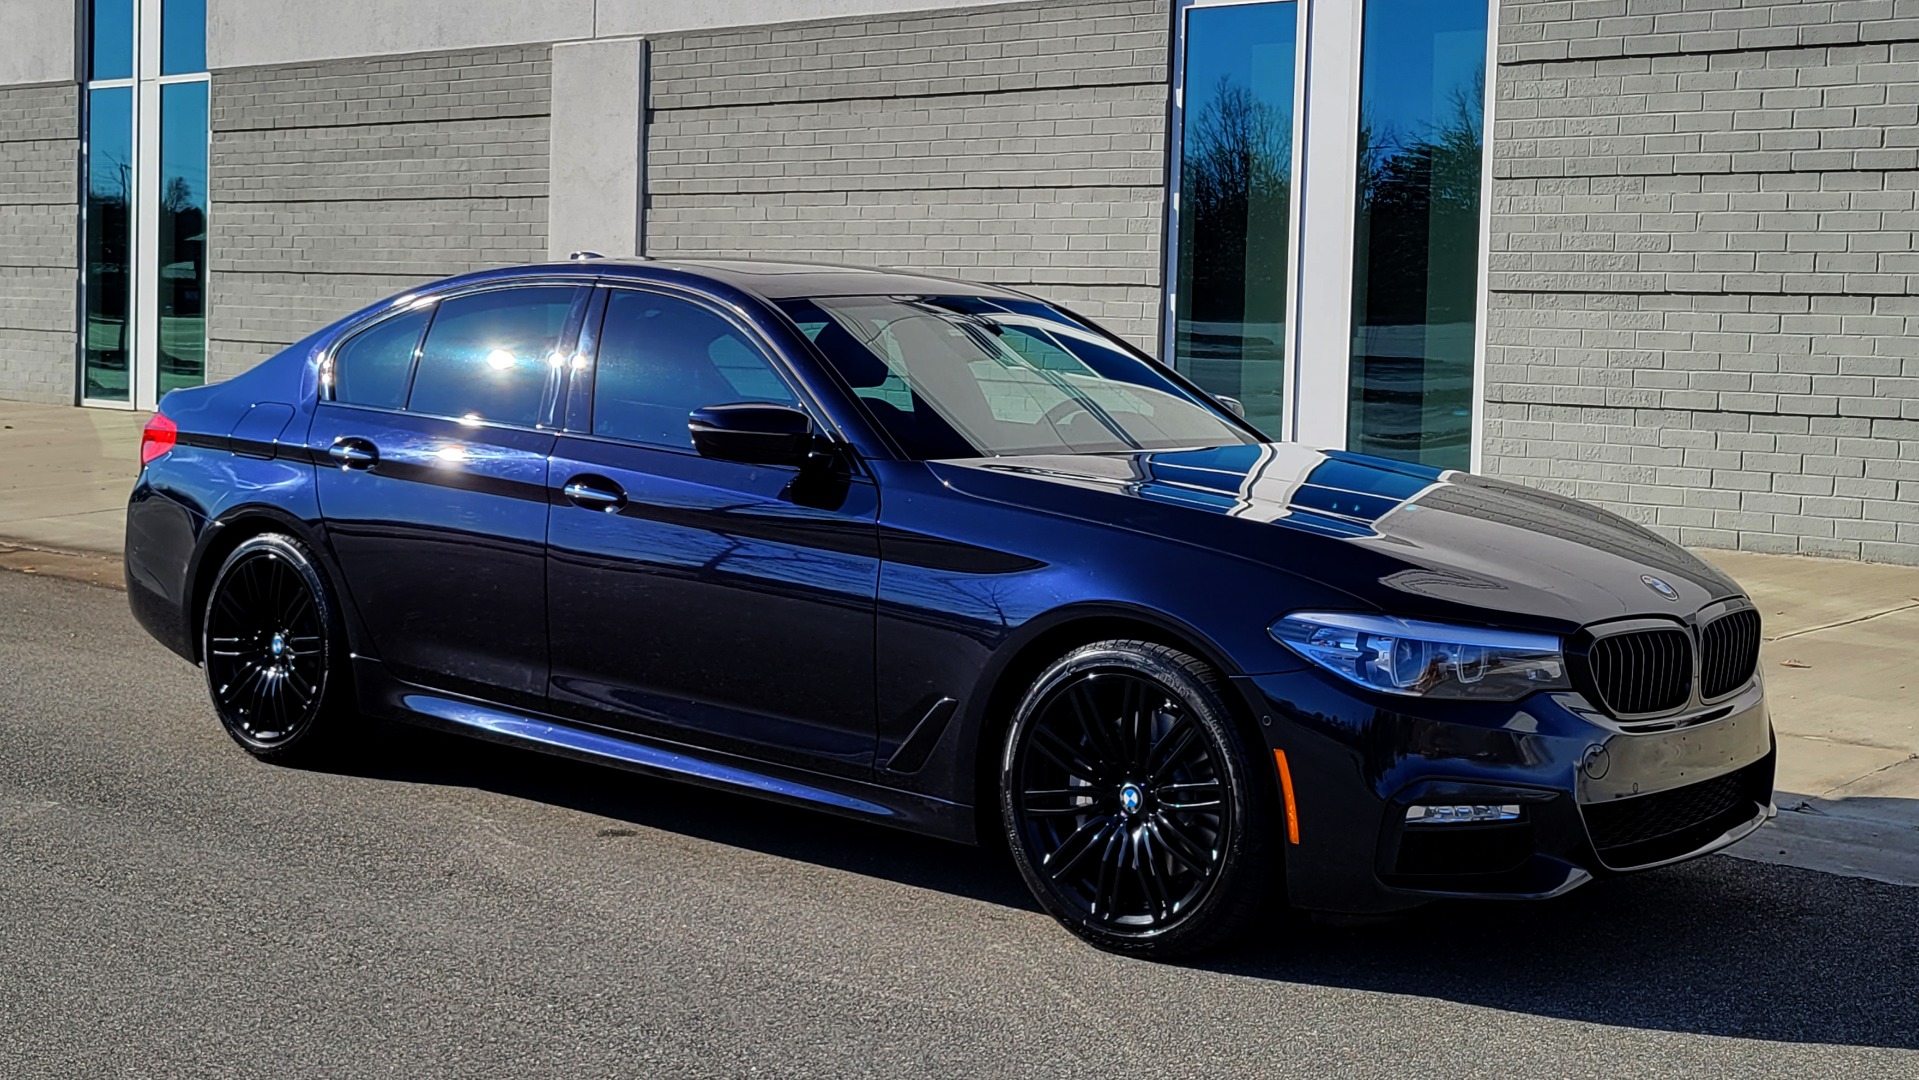 Used 2018 BMW 5 SERIES 540I XDRIVE 3.0L / M-SPORT / NAV / WIFI / SUNROOF / REARVIEW for sale Sold at Formula Imports in Charlotte NC 28227 10